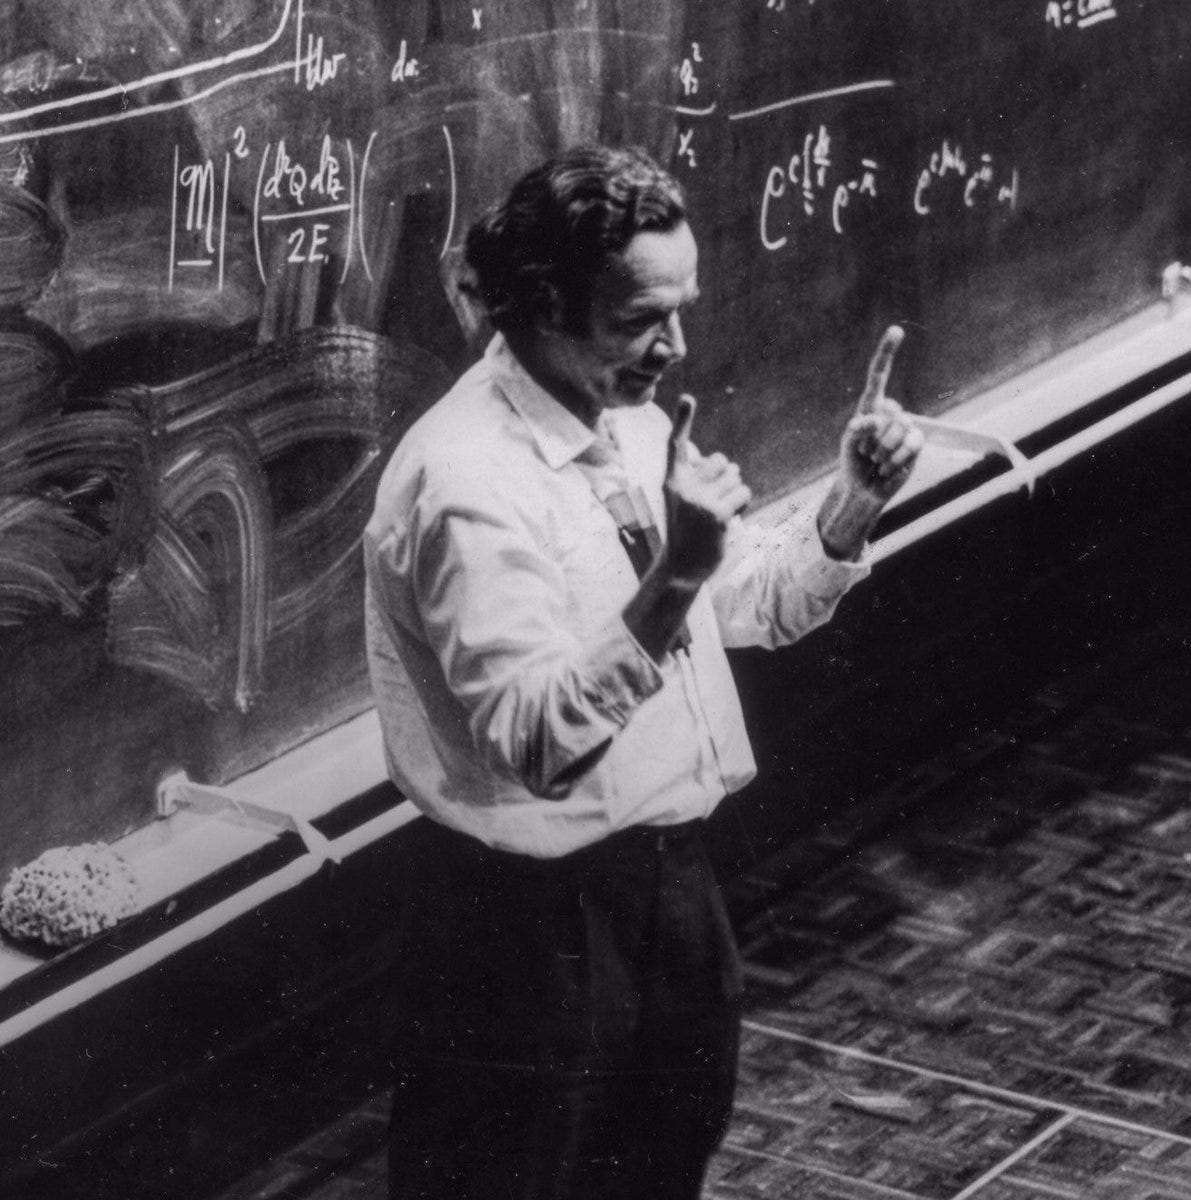 Richard Feynman on Twitter: "If you cannot explain something in simple  terms, you don't understand it. The best way to learn is to teach. The  ultimate test of your knowledge is your